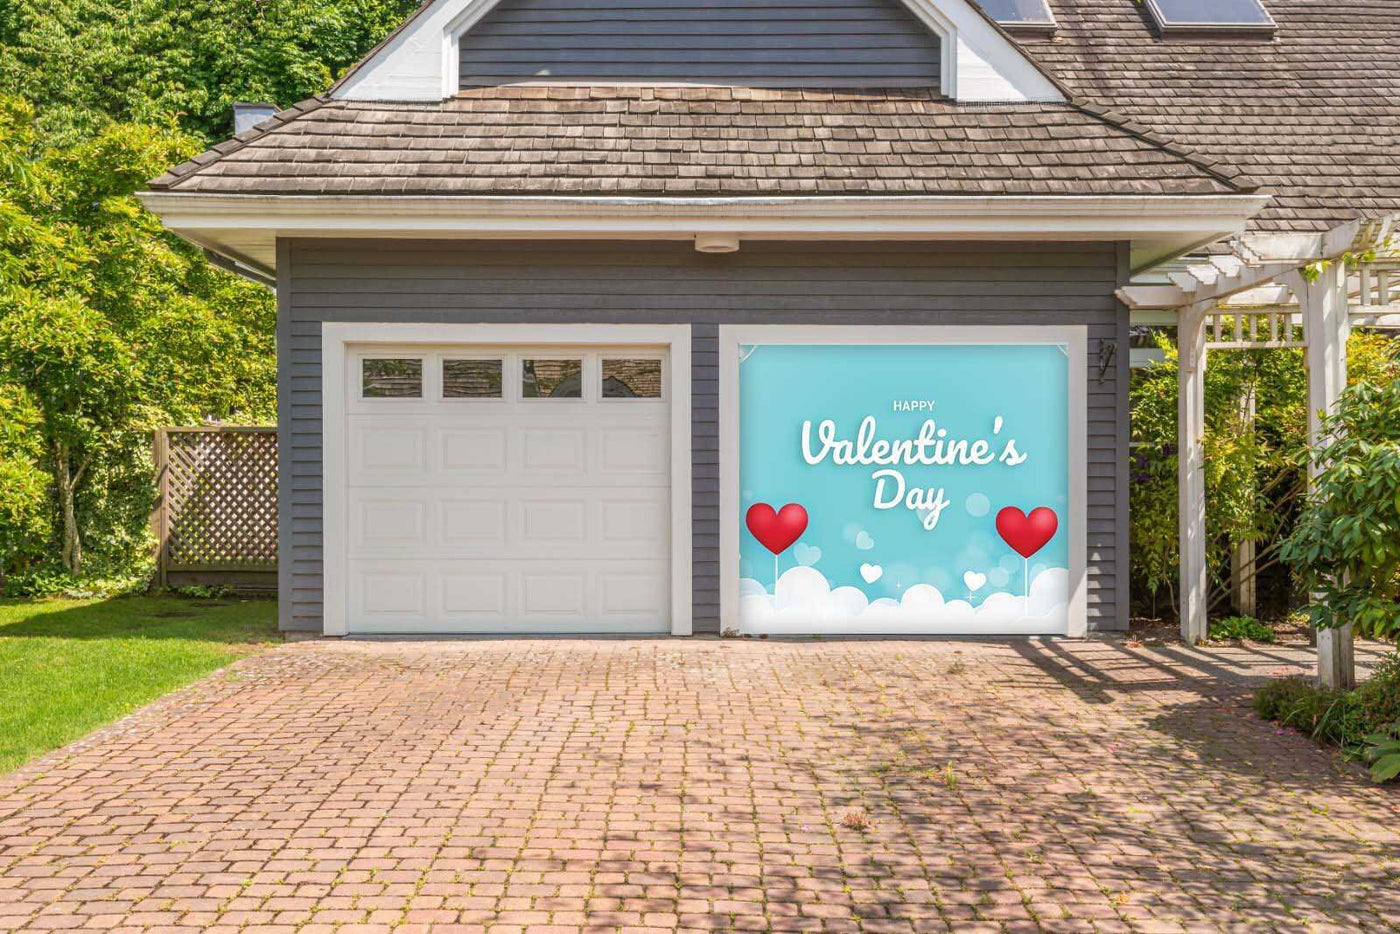 Happy Valentines Day Red Hearts Garage Door Cover Wrap Mural Home Decoration (Design #3)